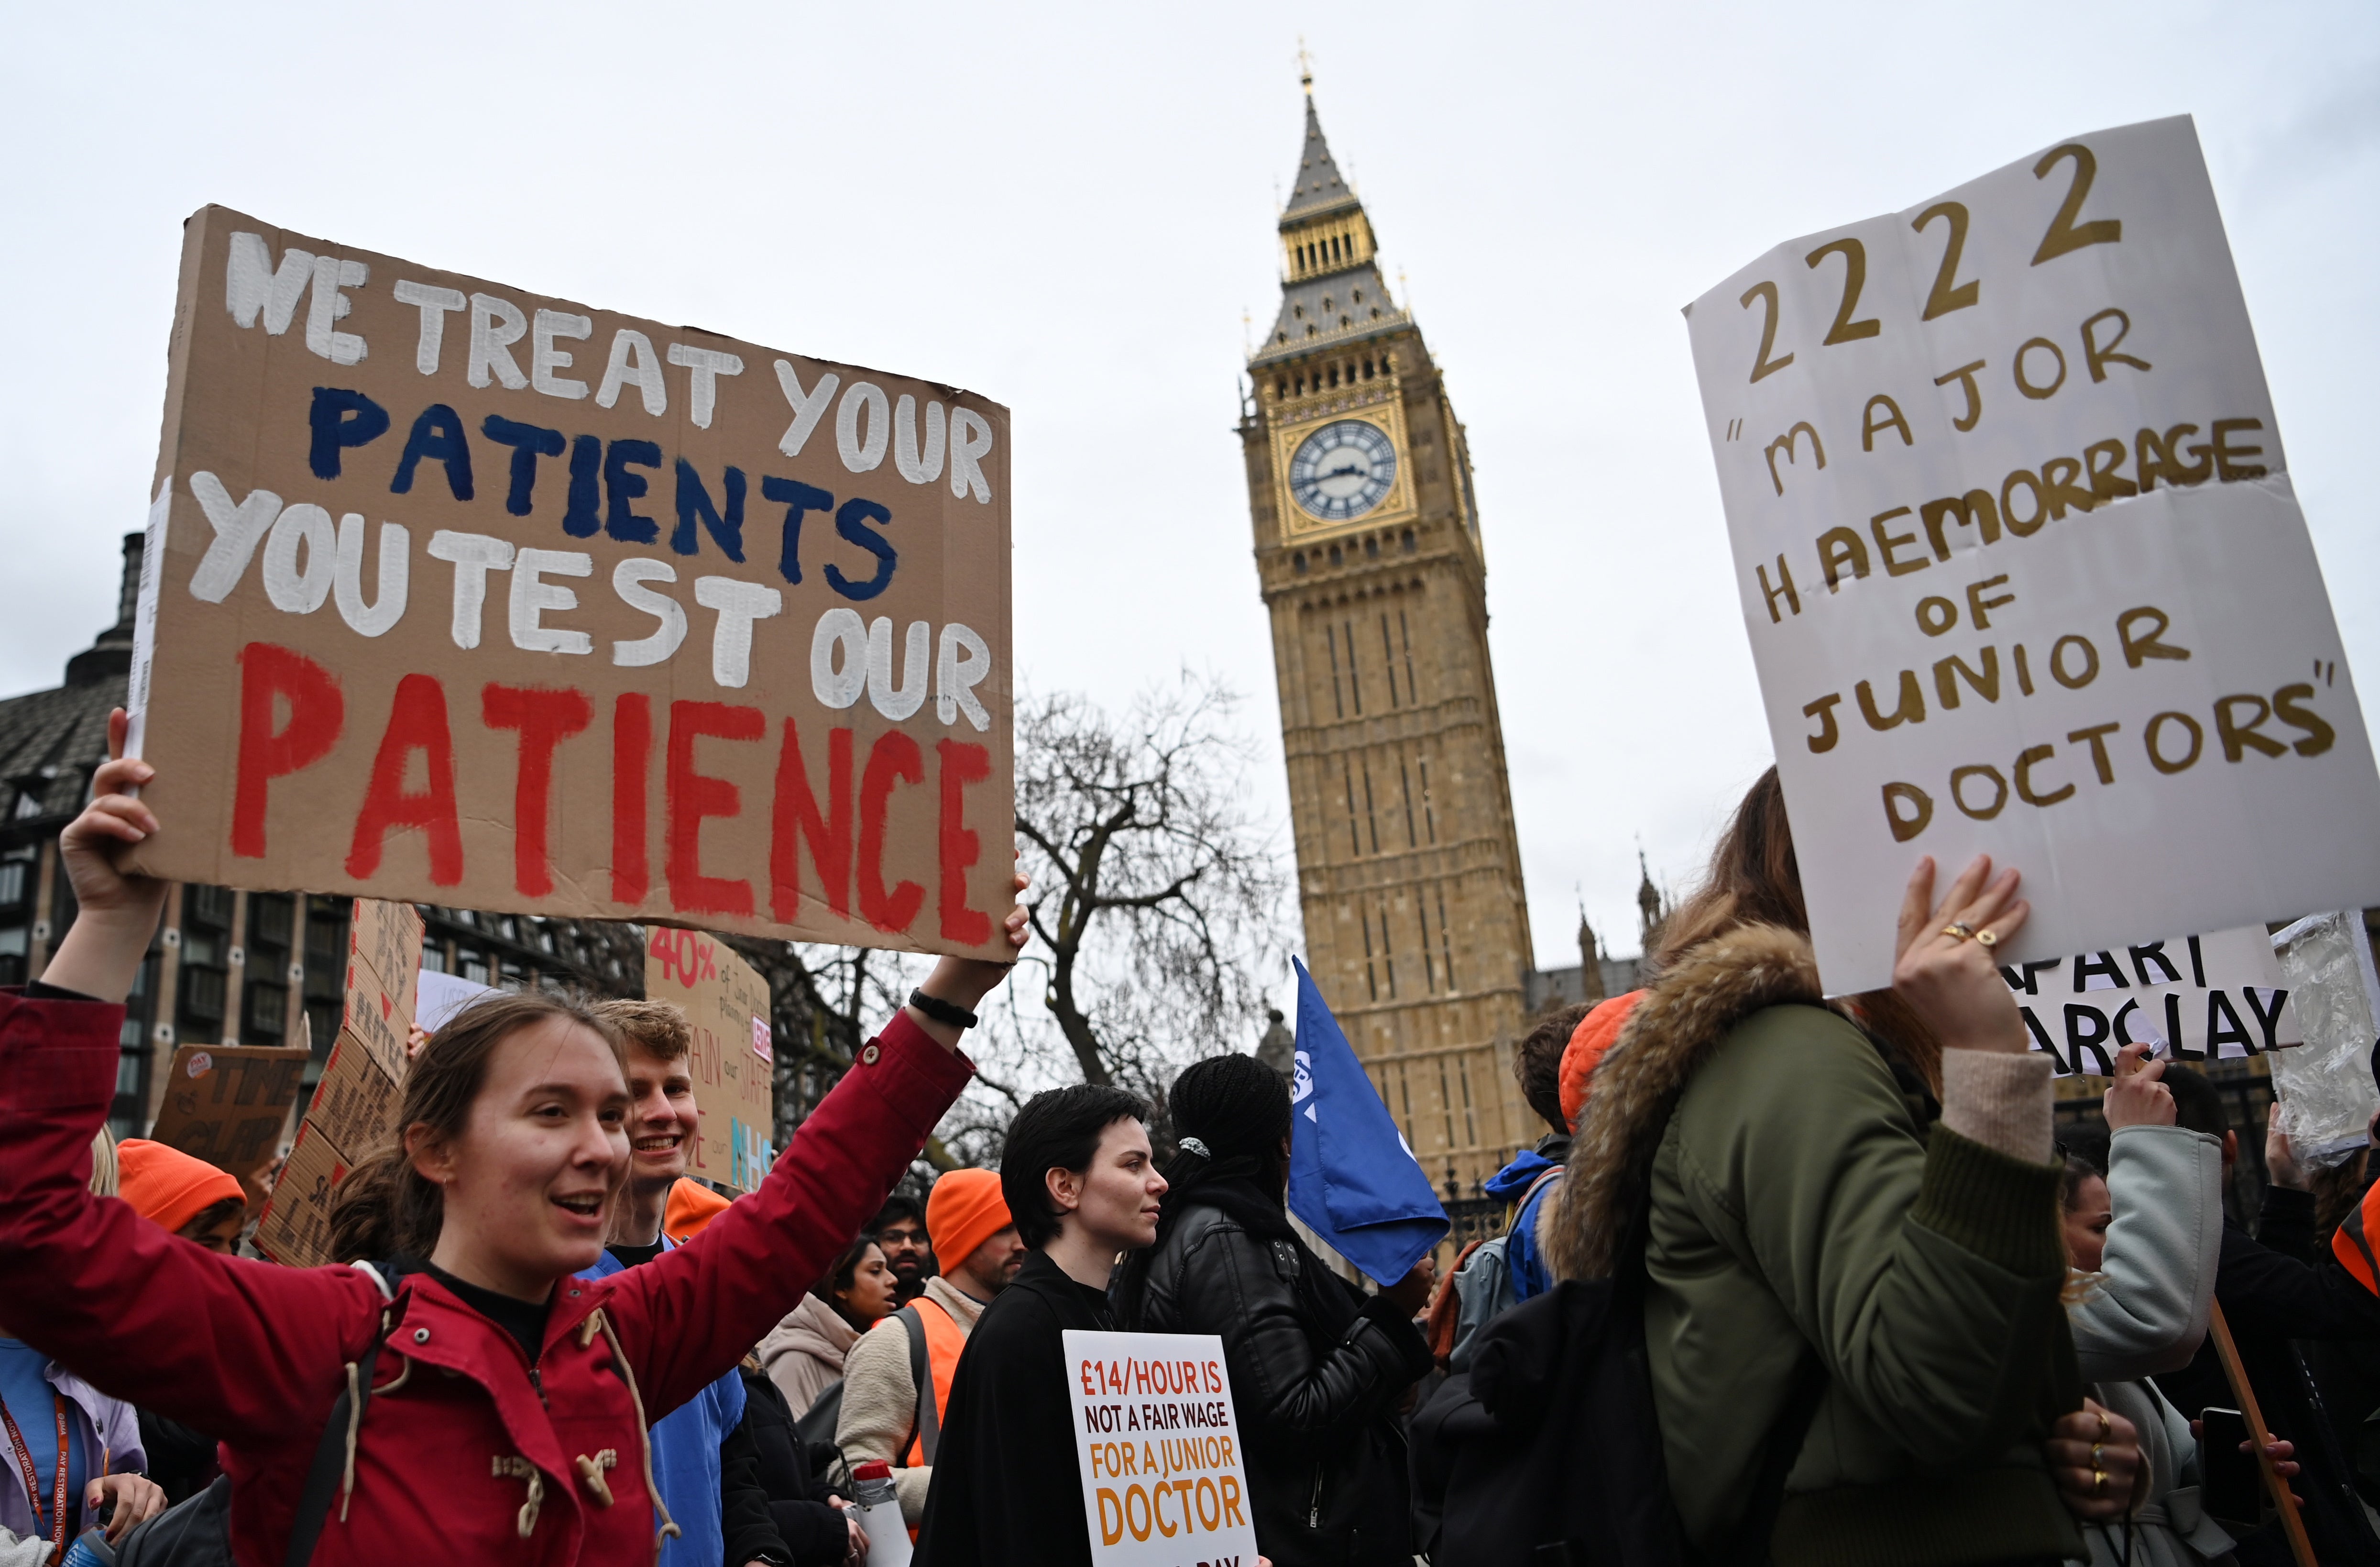 Junior doctors hold a a protest march in London on Tuesday